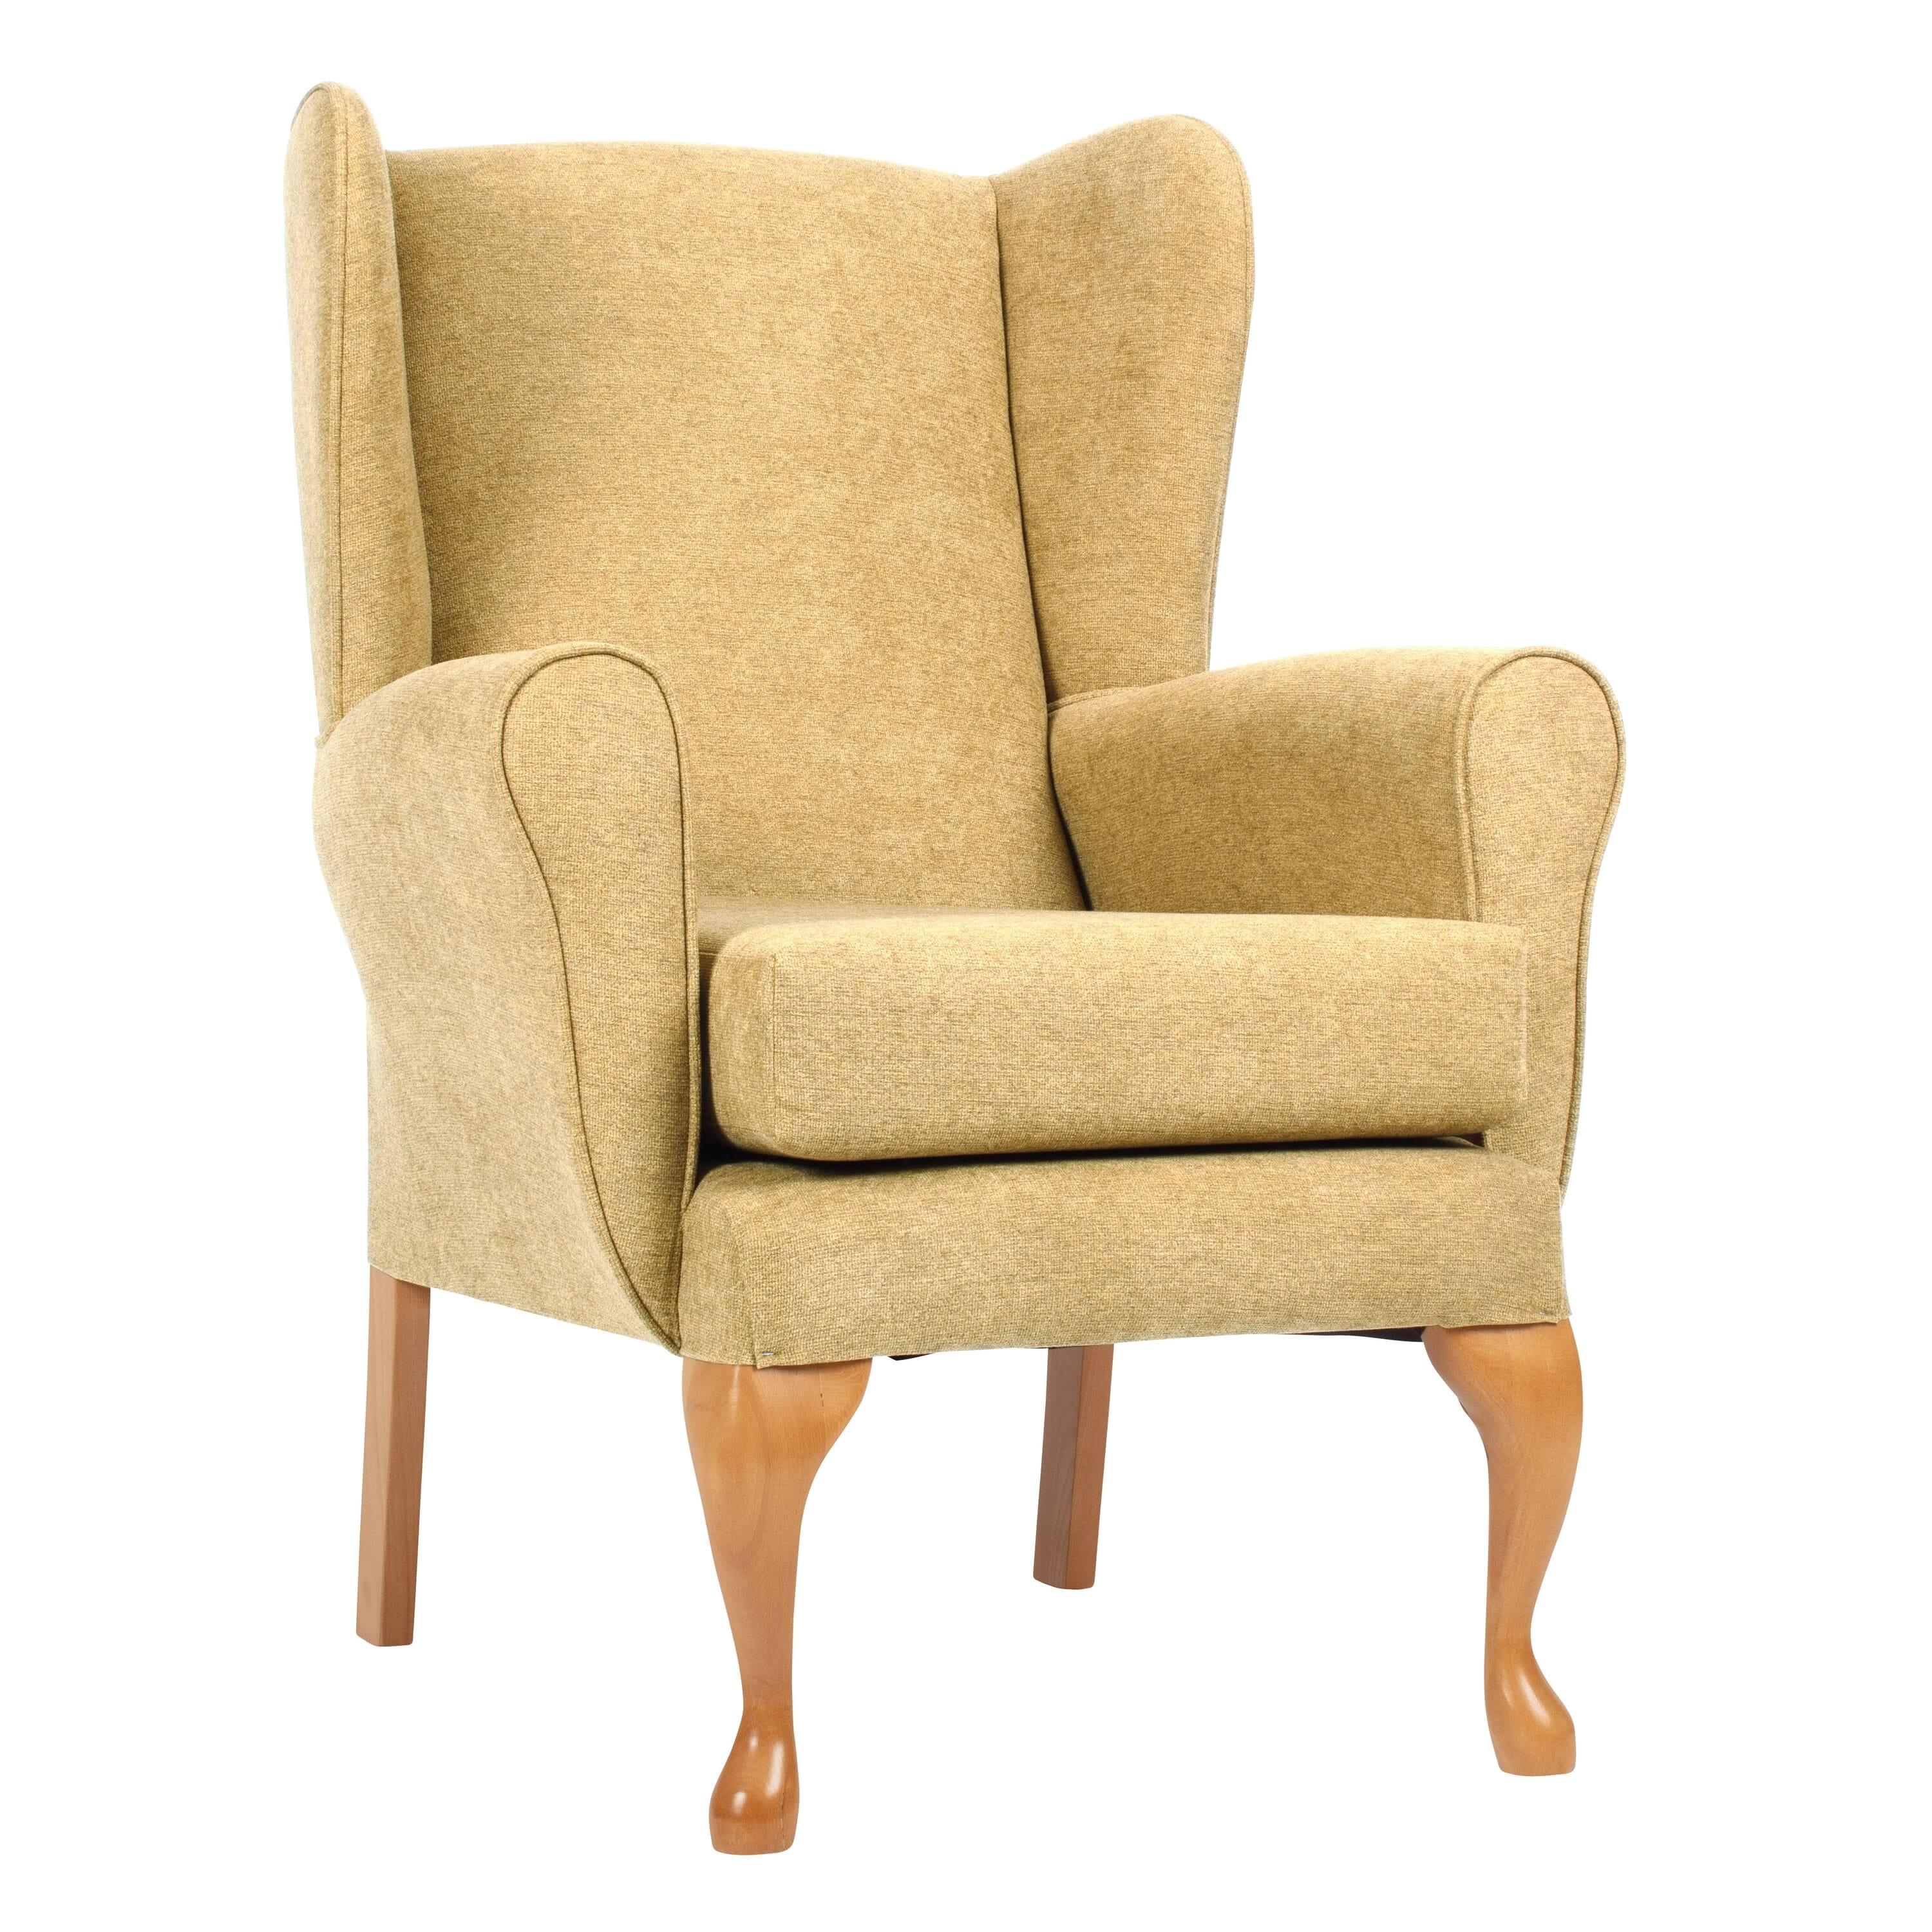 View Queen Anne Fireside Chair Pale Gold information